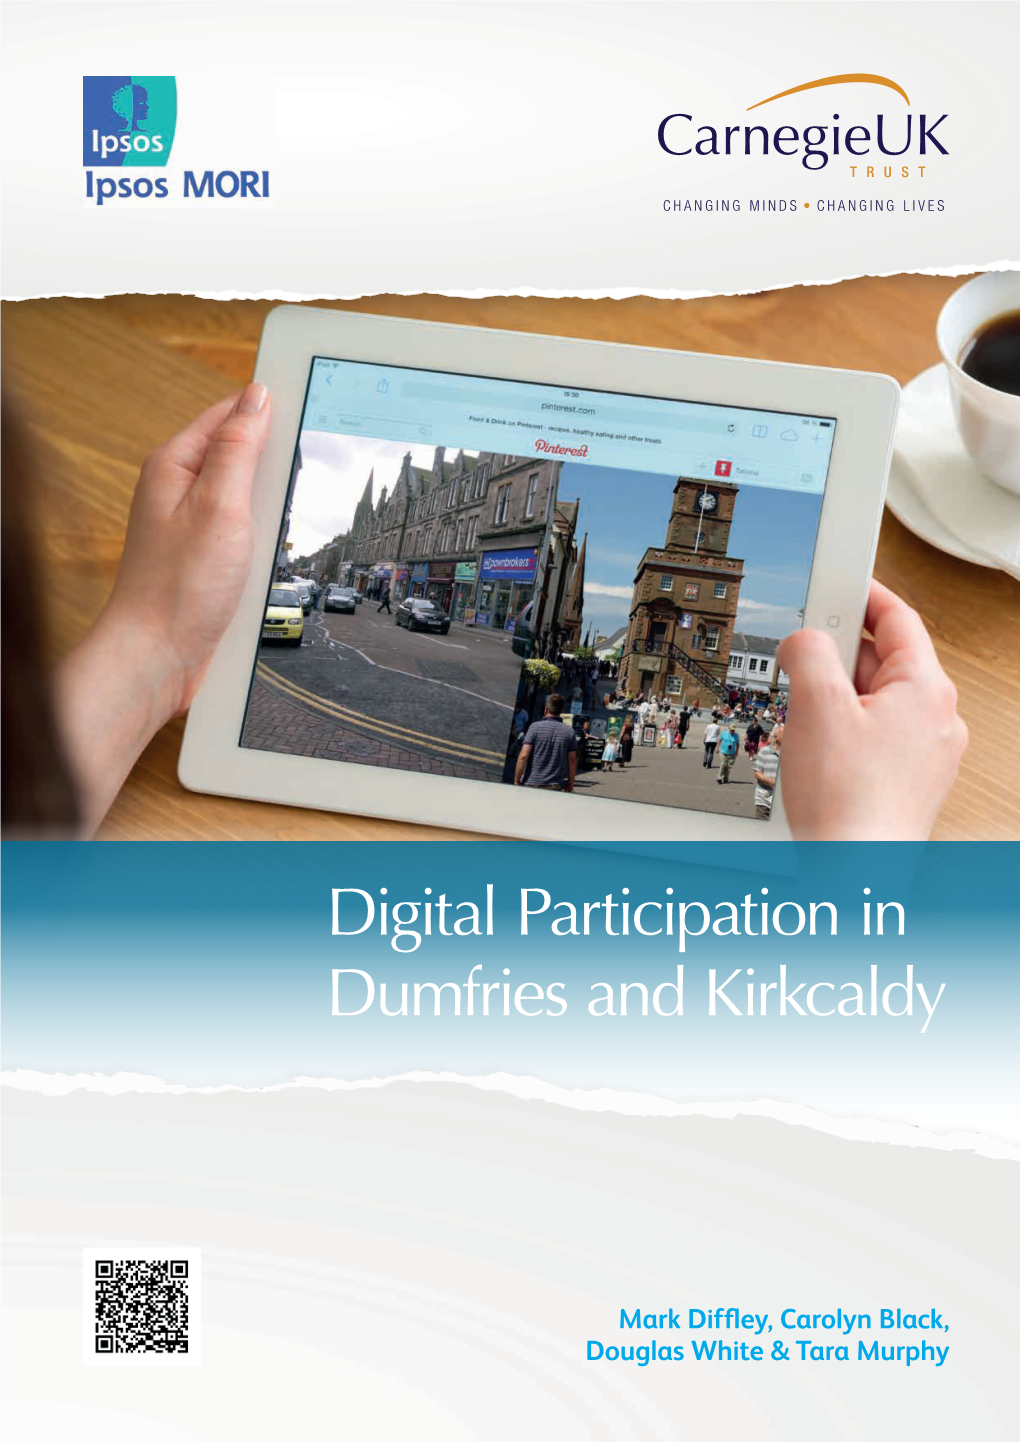 Digital Participation in Dumfries and Kirkcaldy